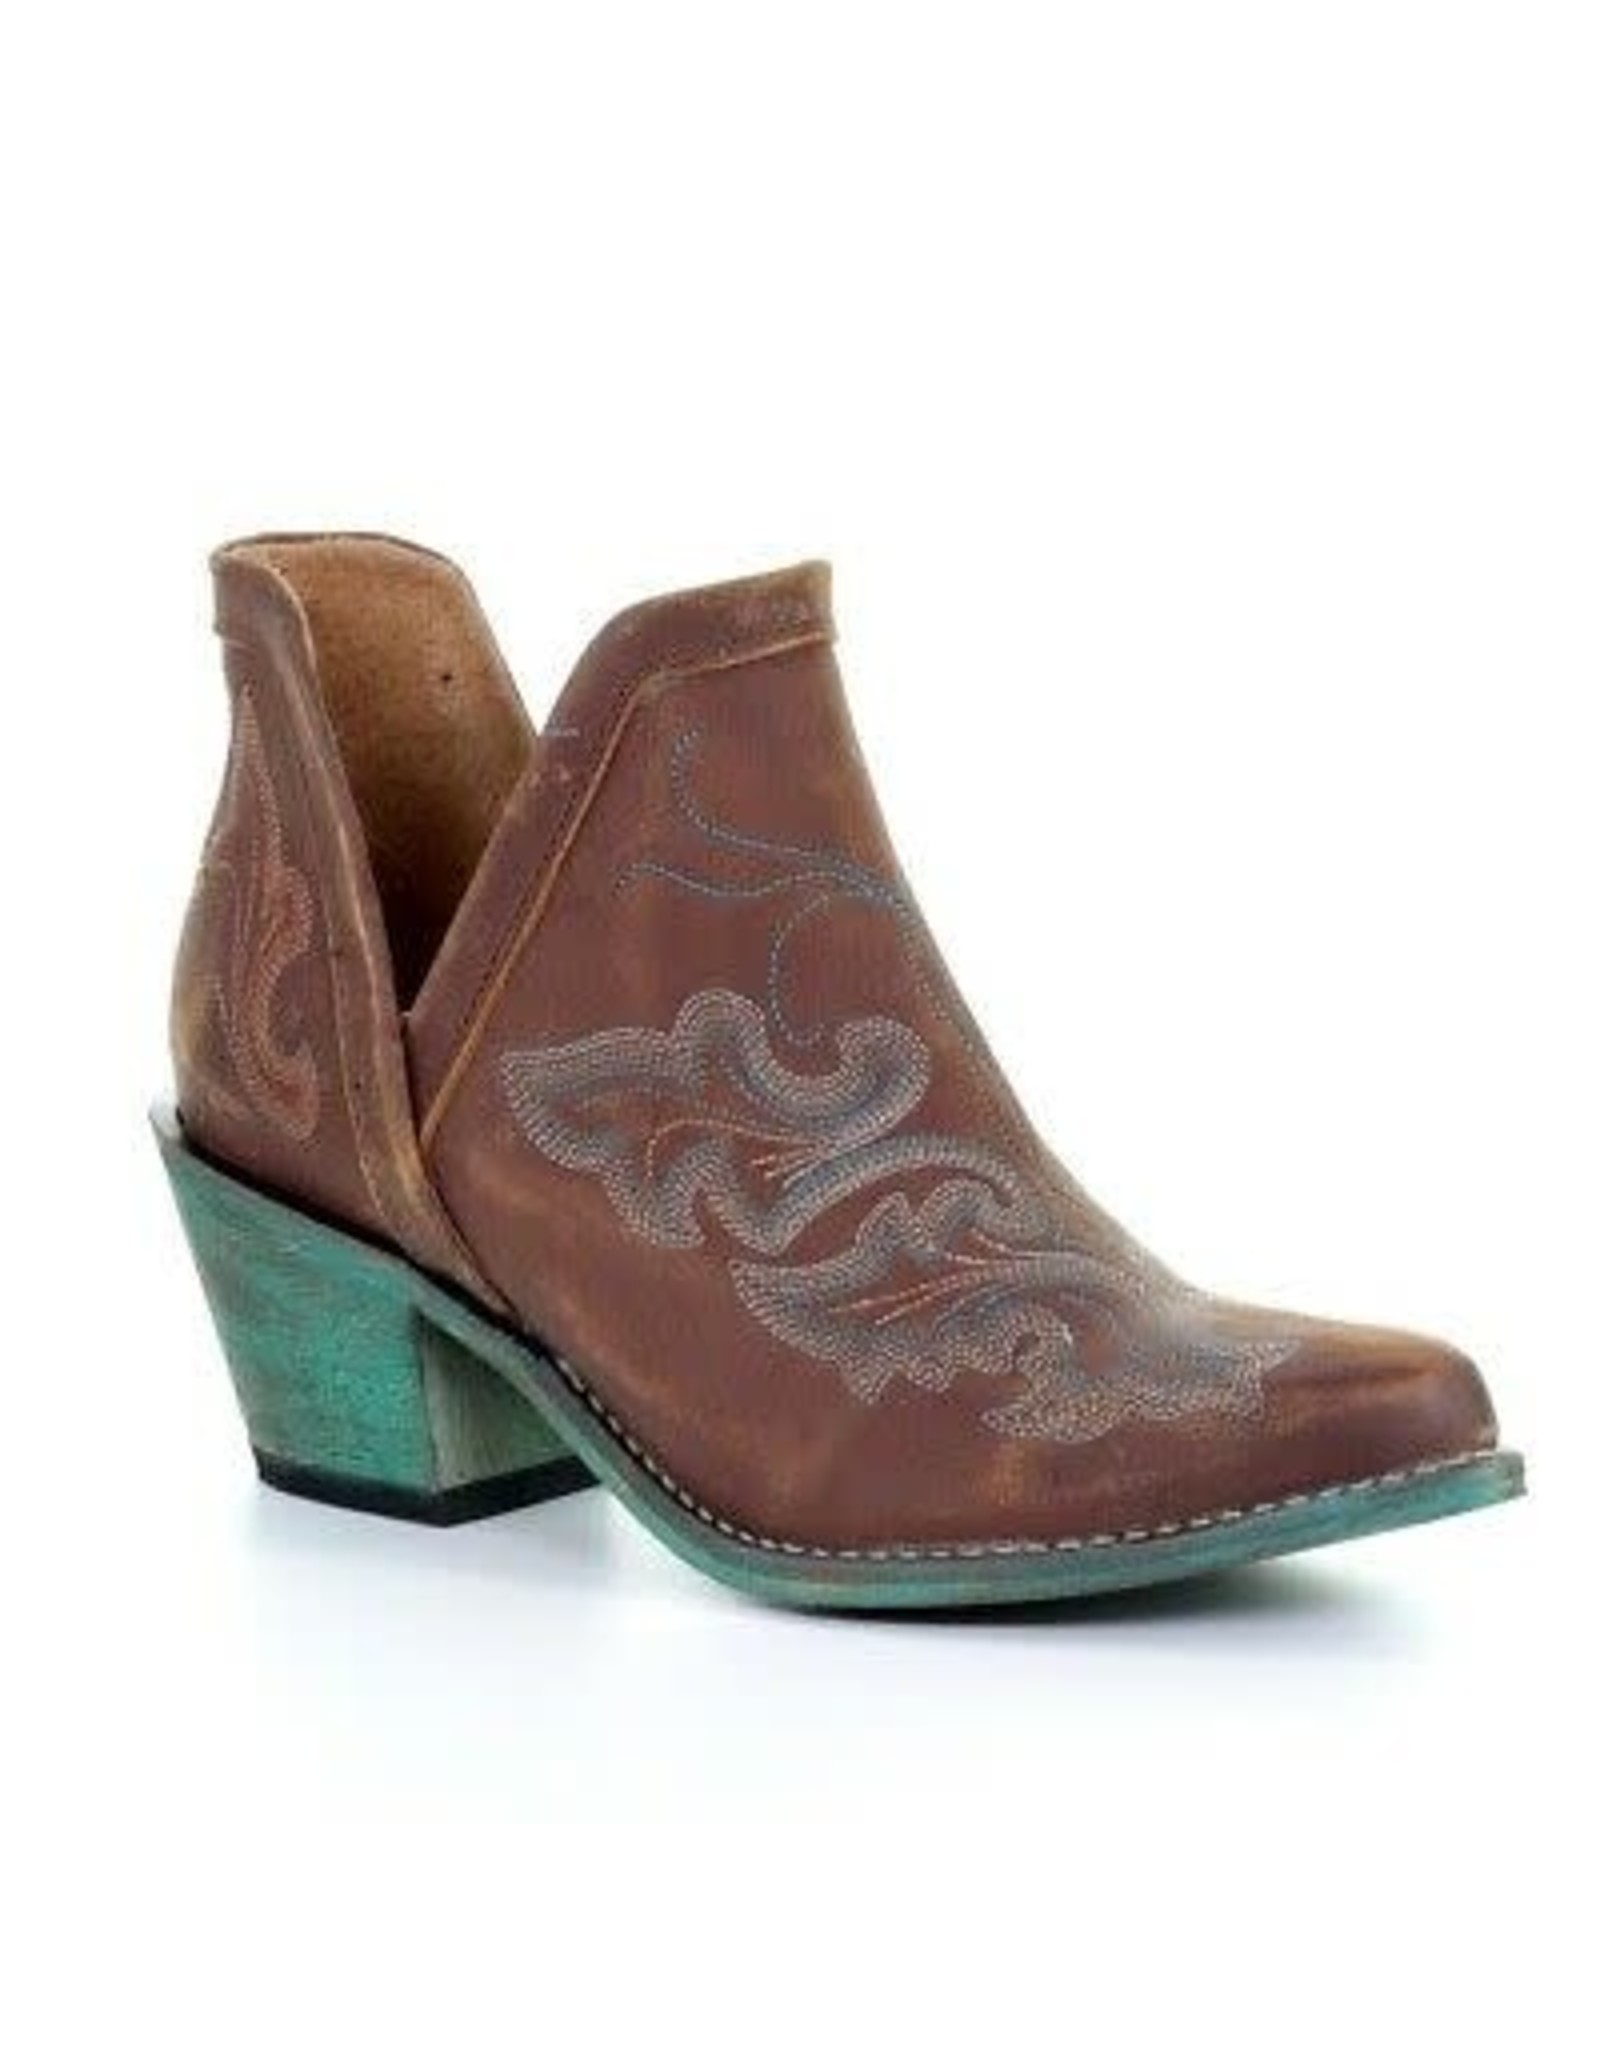 Circle G Ladies Cognac Turquoise Q0099 Embroidered Booties